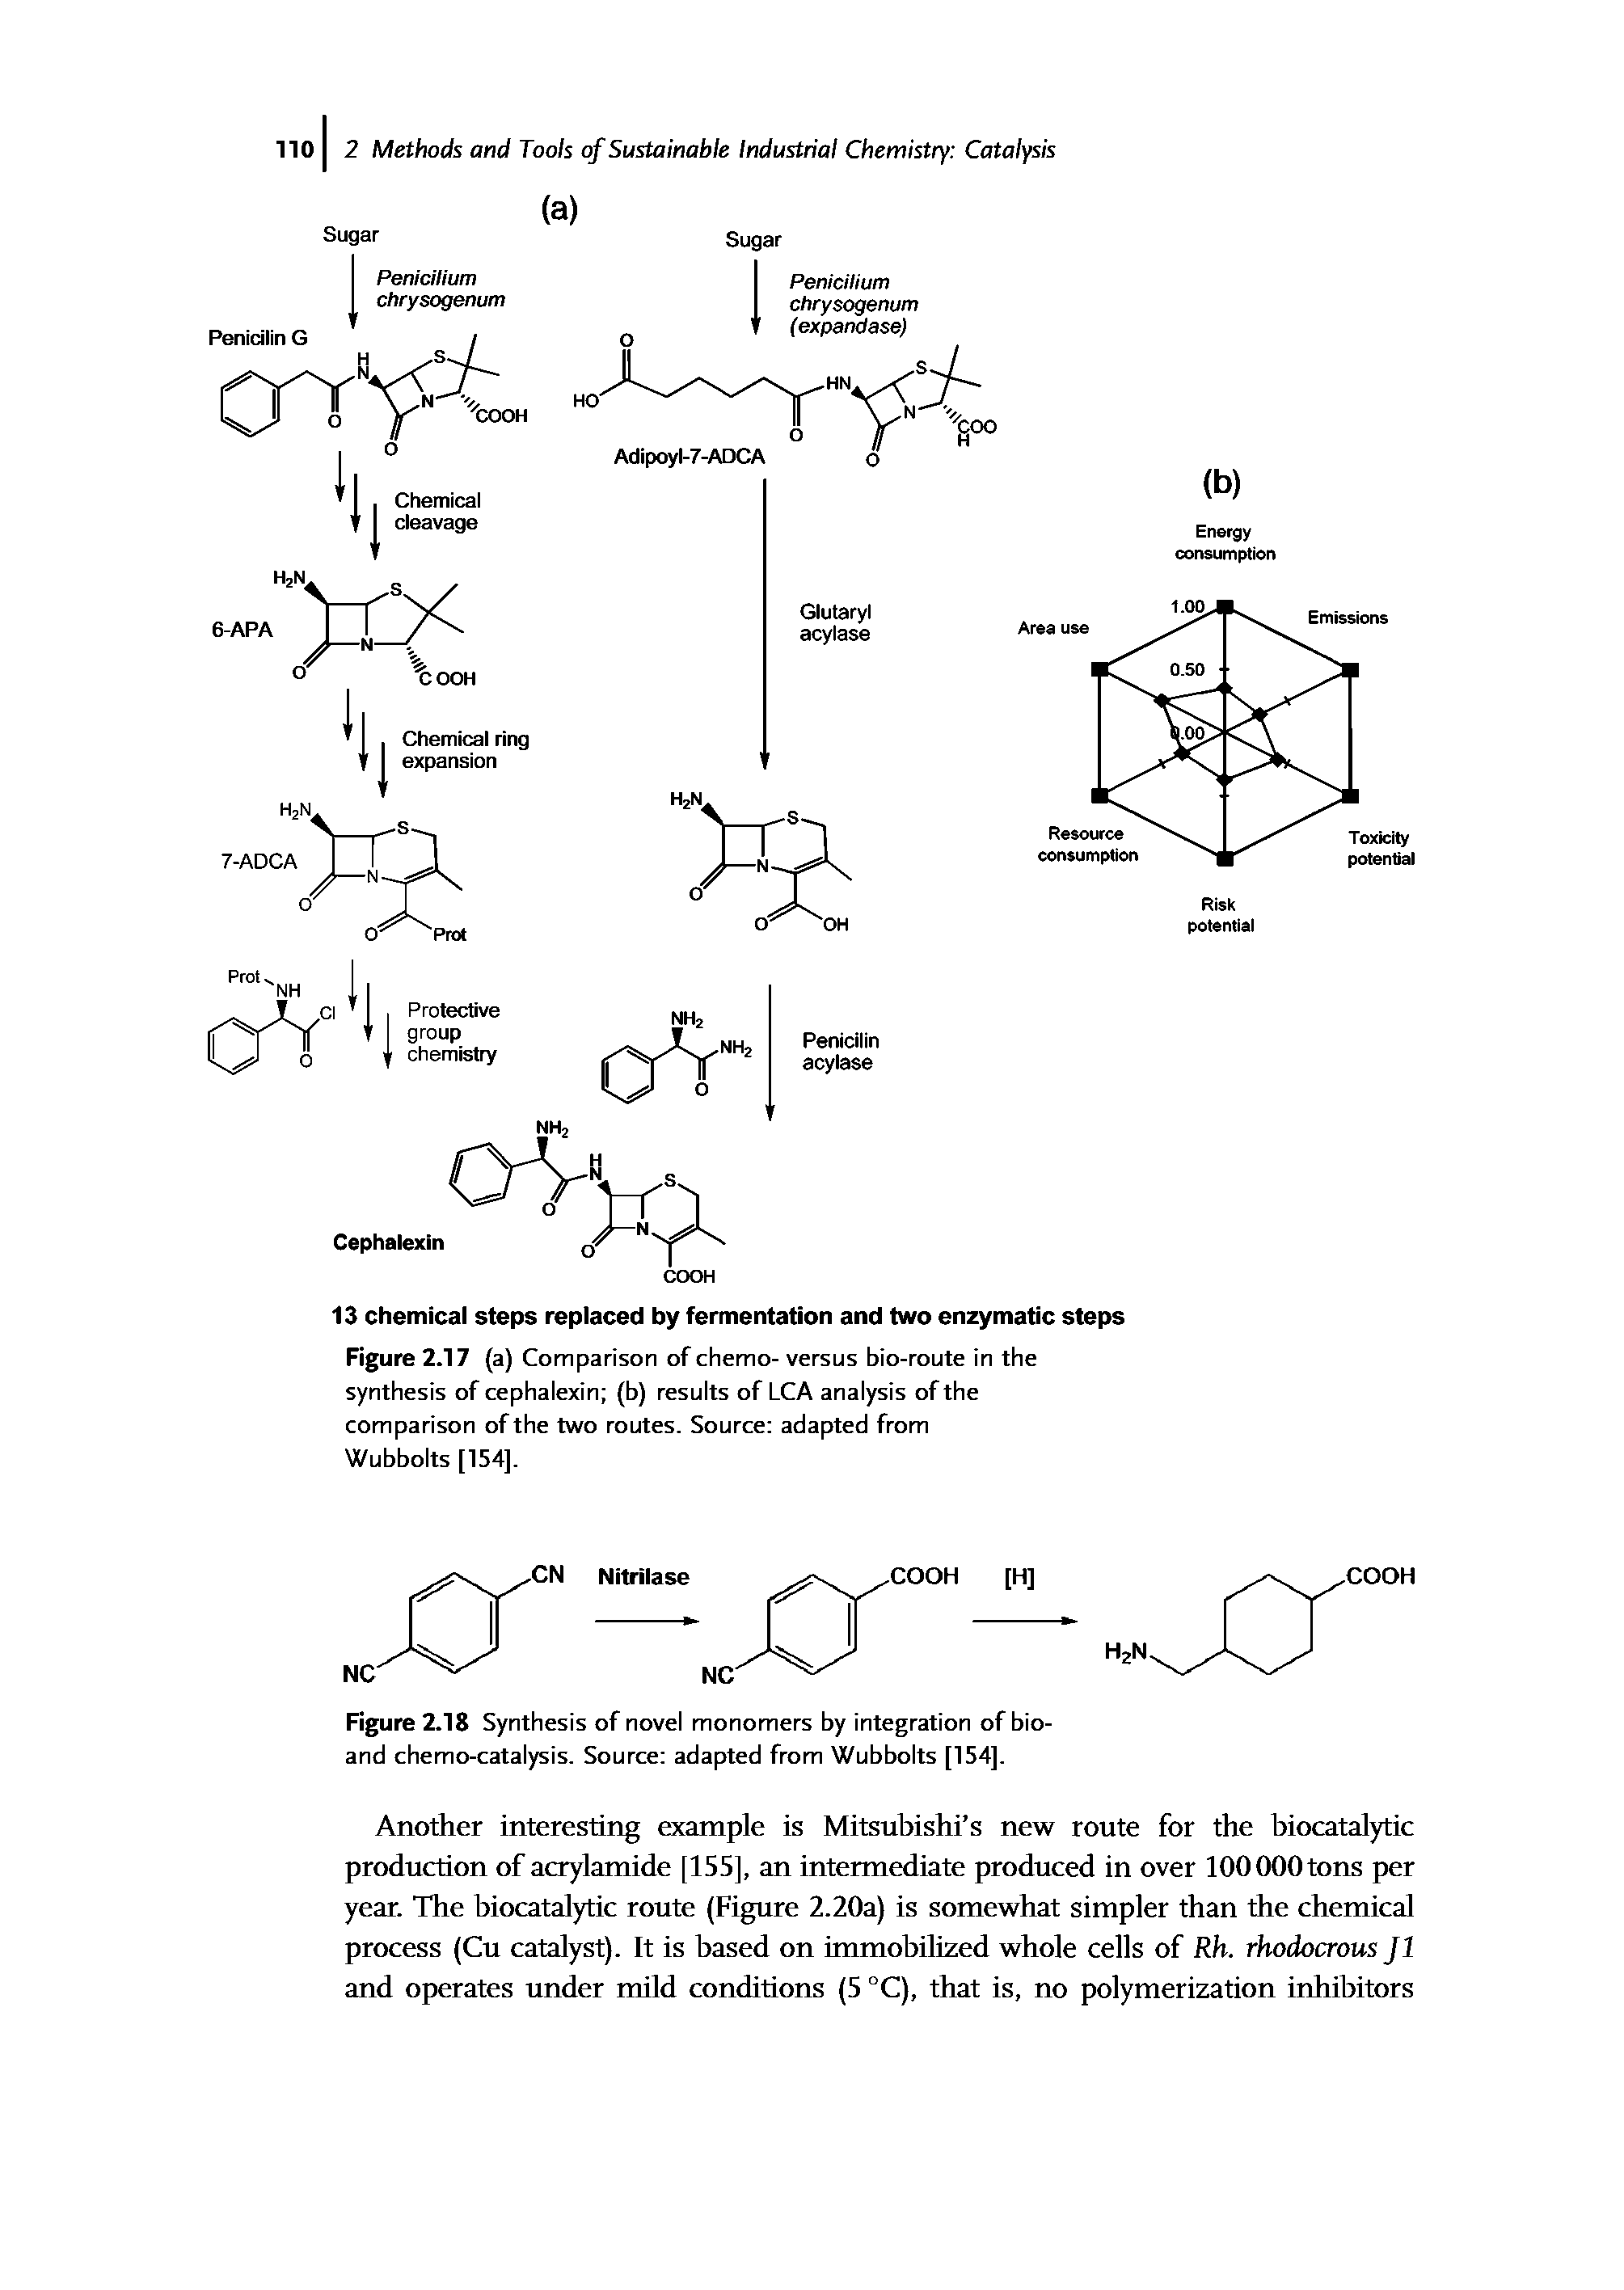 Figure 2.18 Synthesis of novel monomers by integration of bio-and chemo-catalysis. Source adapted from Wubbolts [154],...